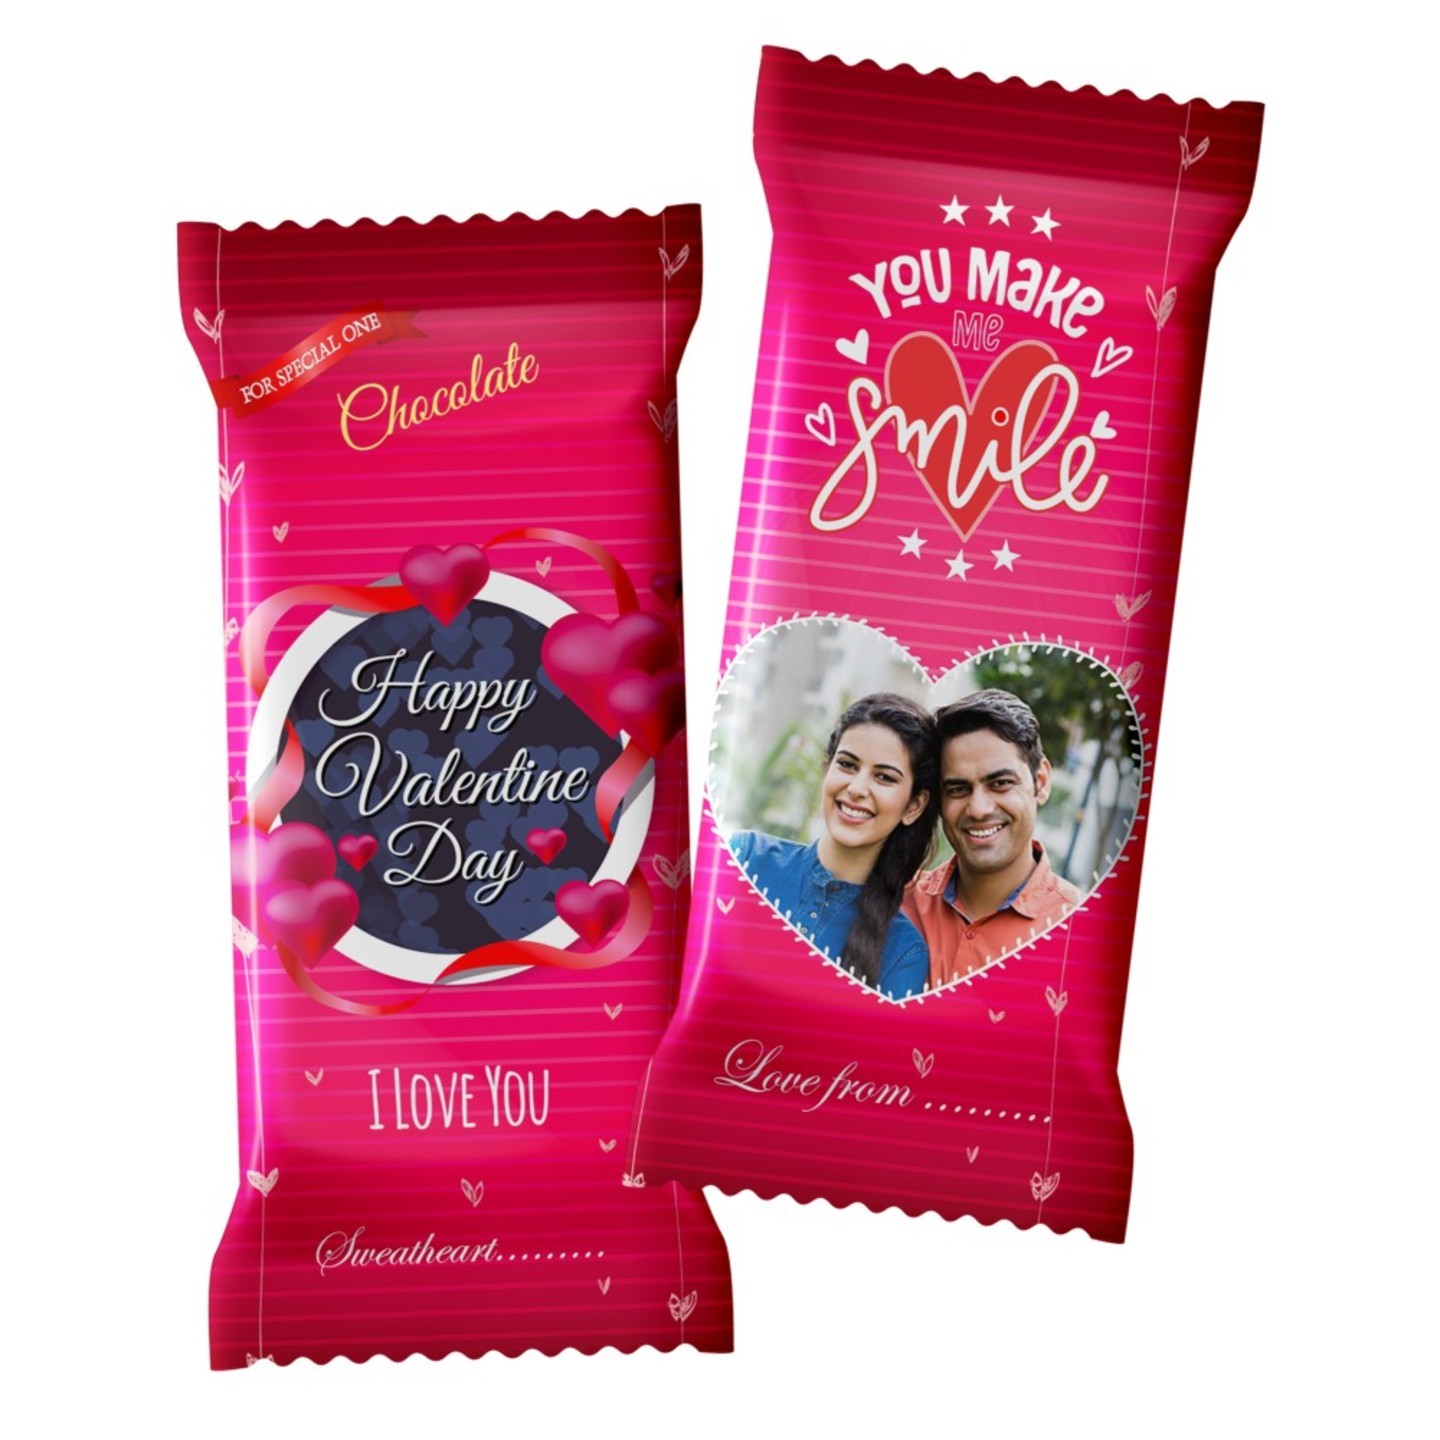 Valentines Day Gifts, Personalized Chocolate 2 Large Bars 100g